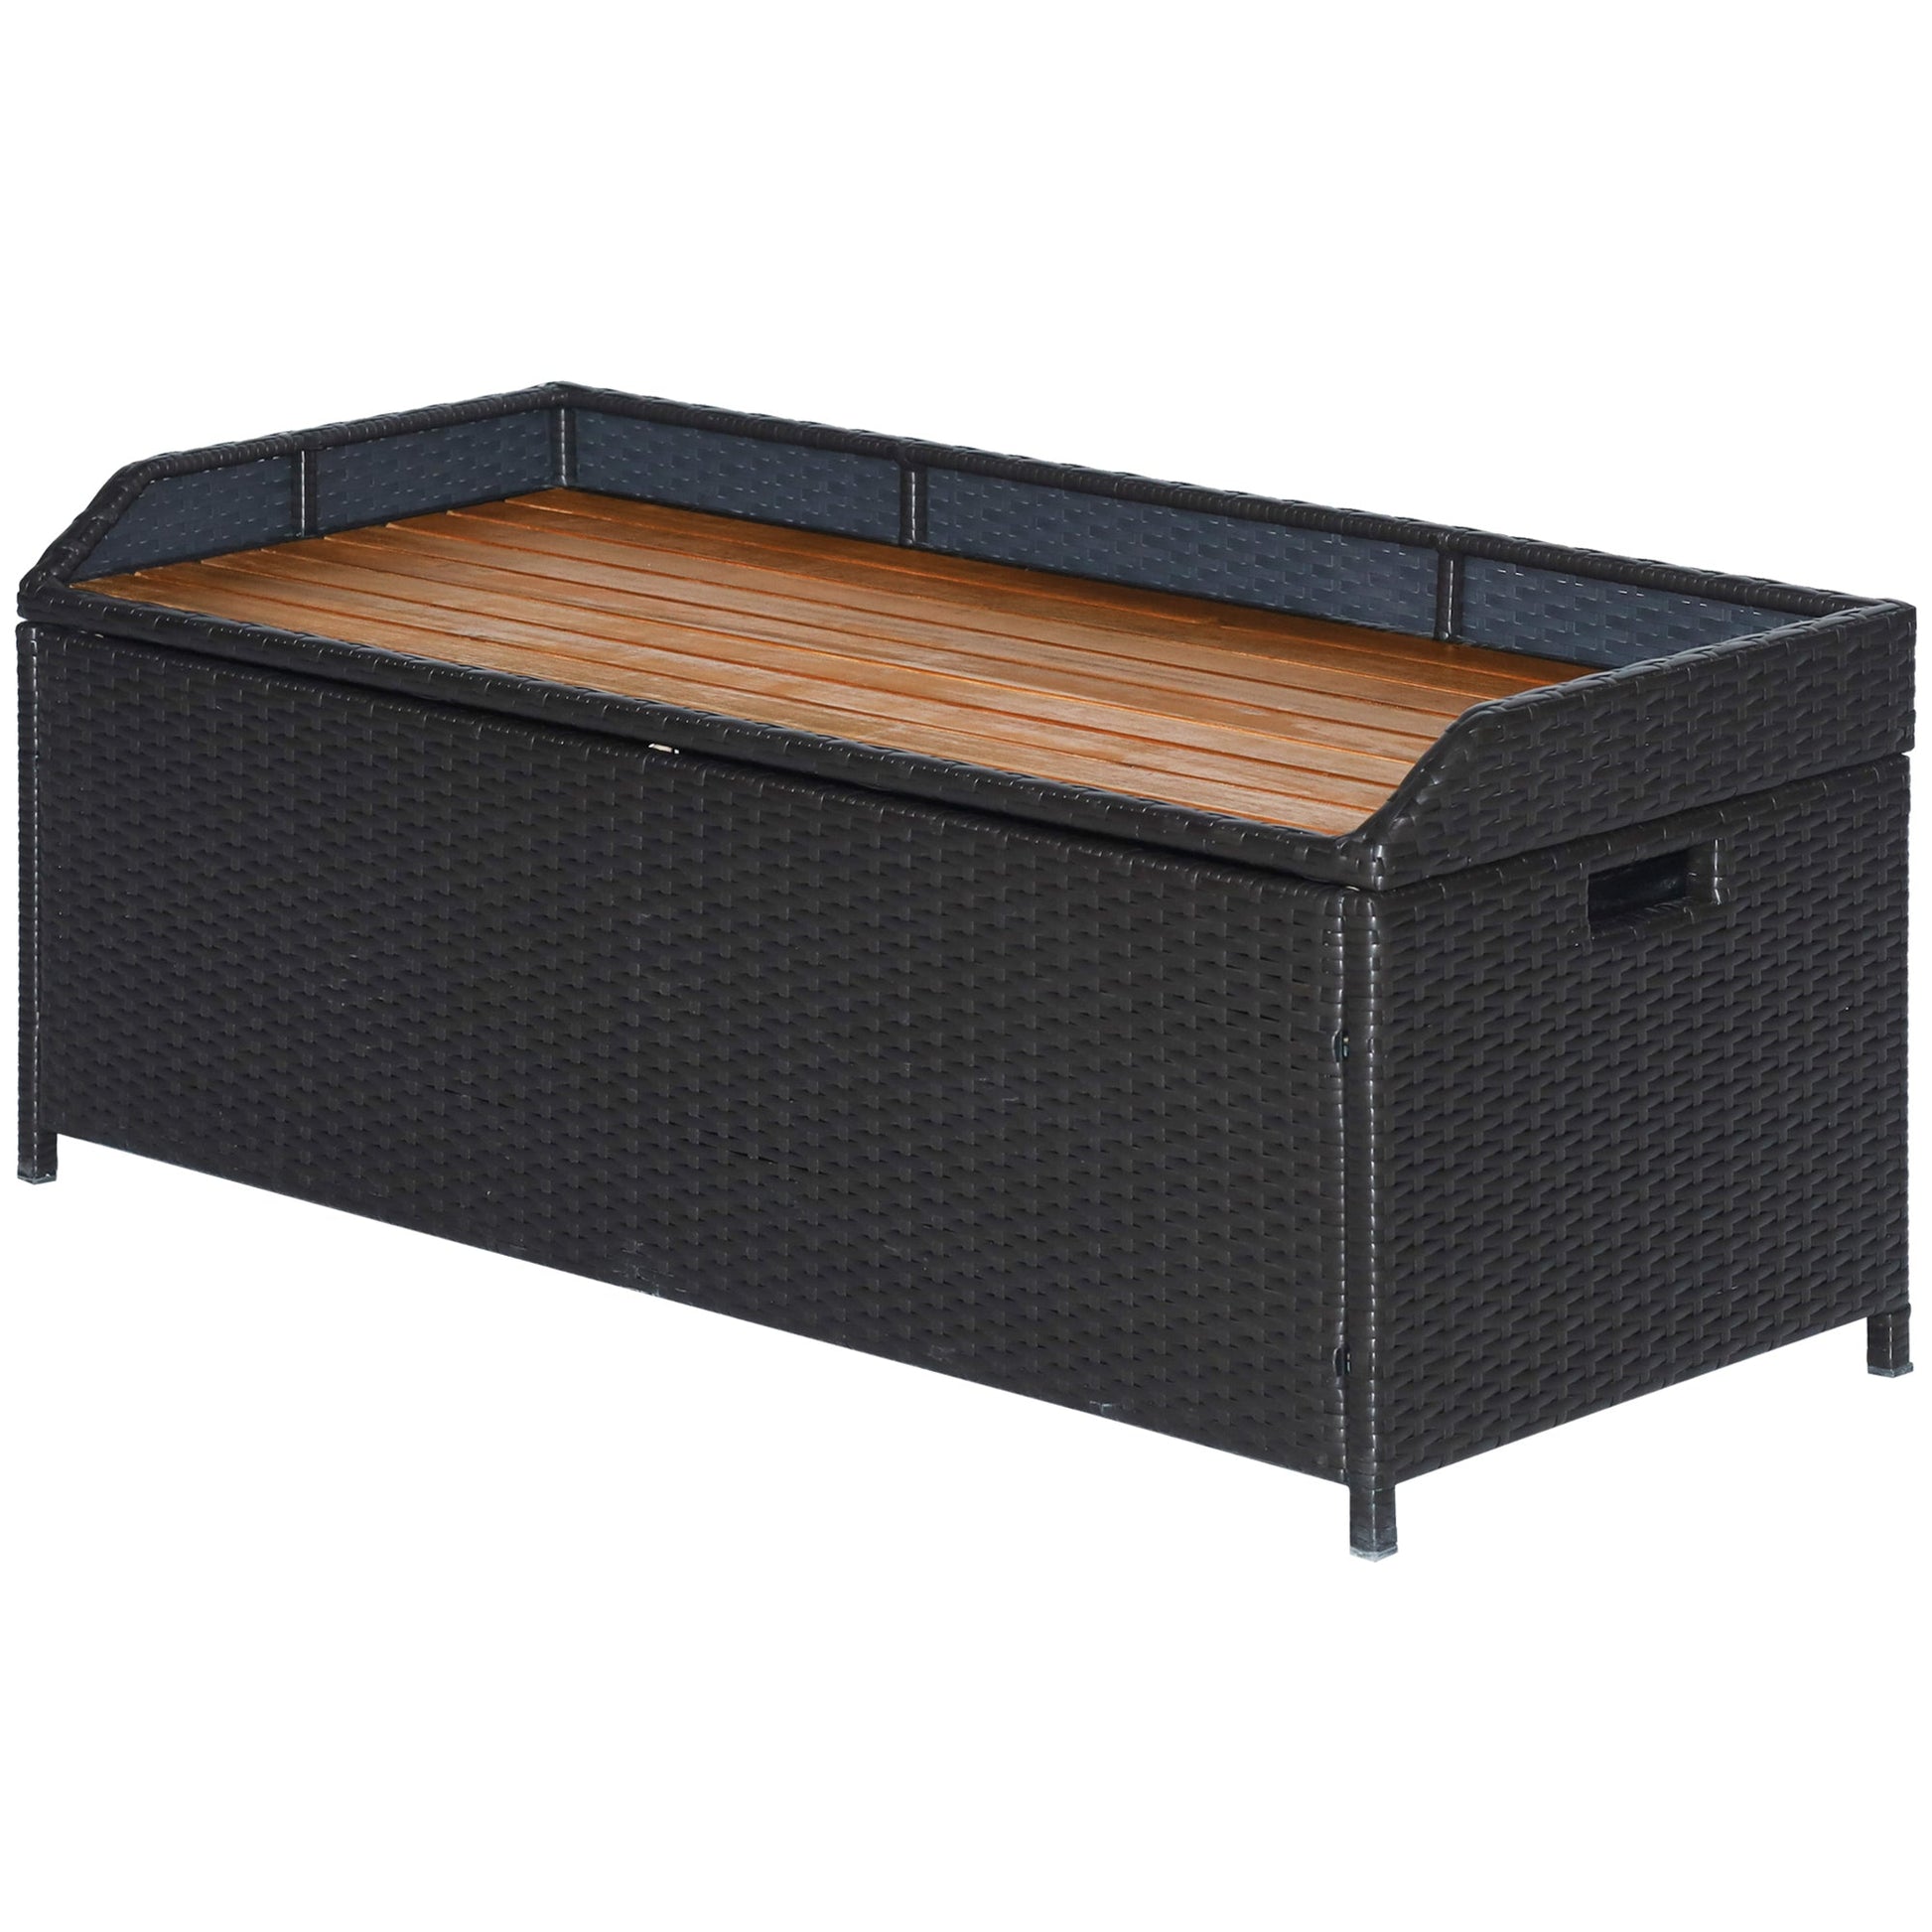 Patio Wicker Storage Bench Box, Outdoor Garden PE Rattan Pool Storage Deck Bin Box w/ Natural Wood Top, Lid, Ideal for Storing Tools, Accessories and Toys, Coffee at Gallery Canada